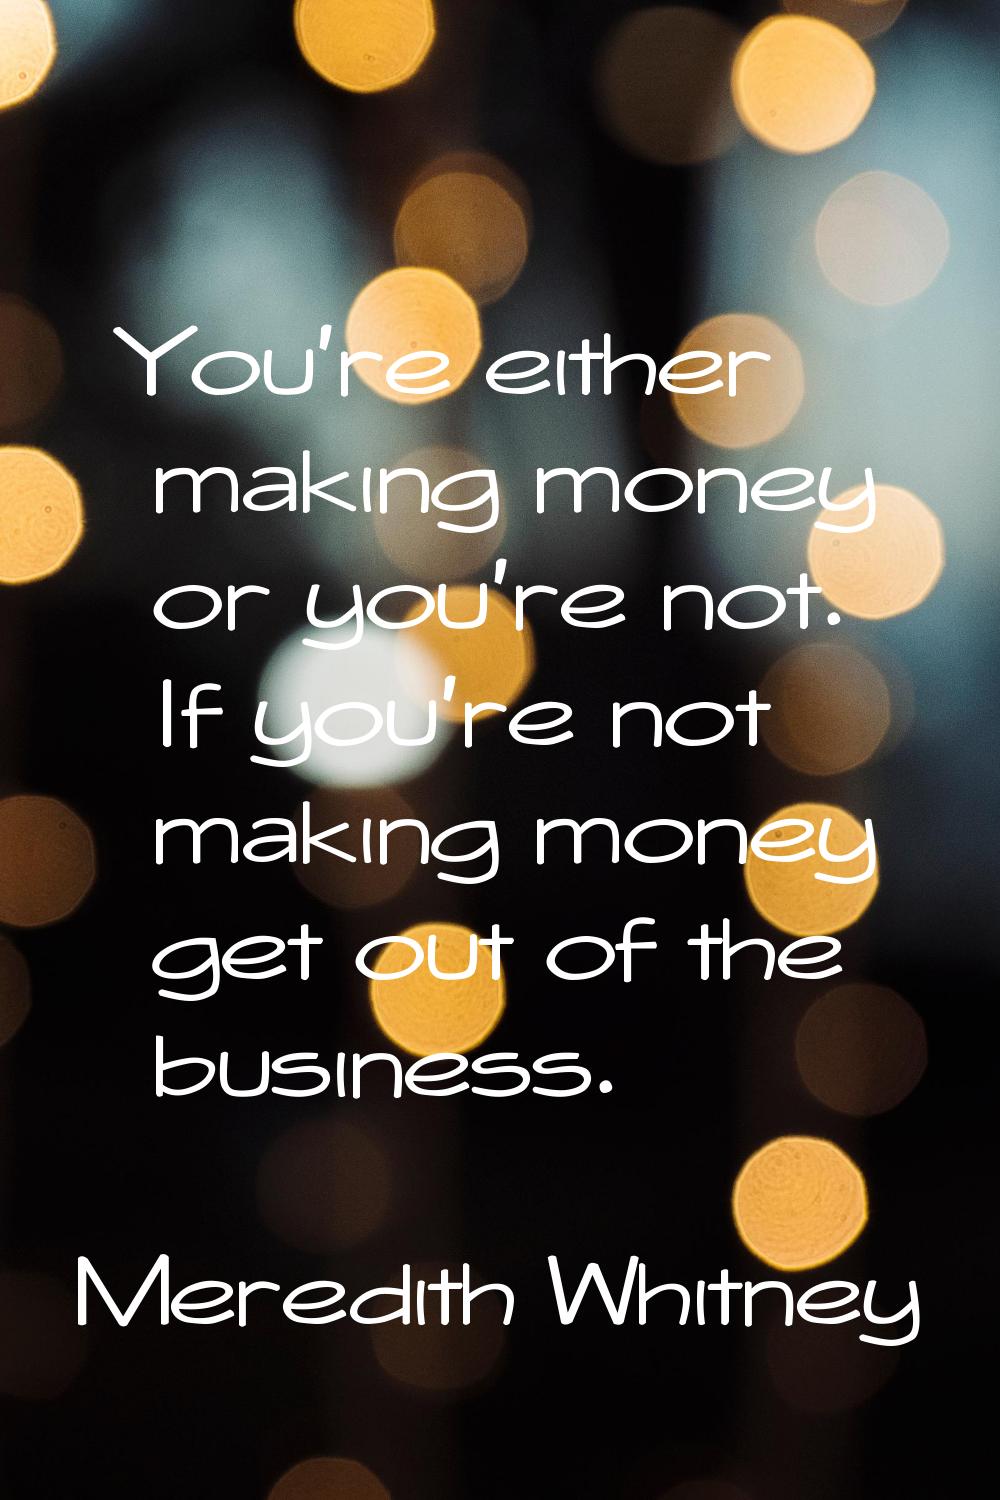 You're either making money or you're not. If you're not making money get out of the business.